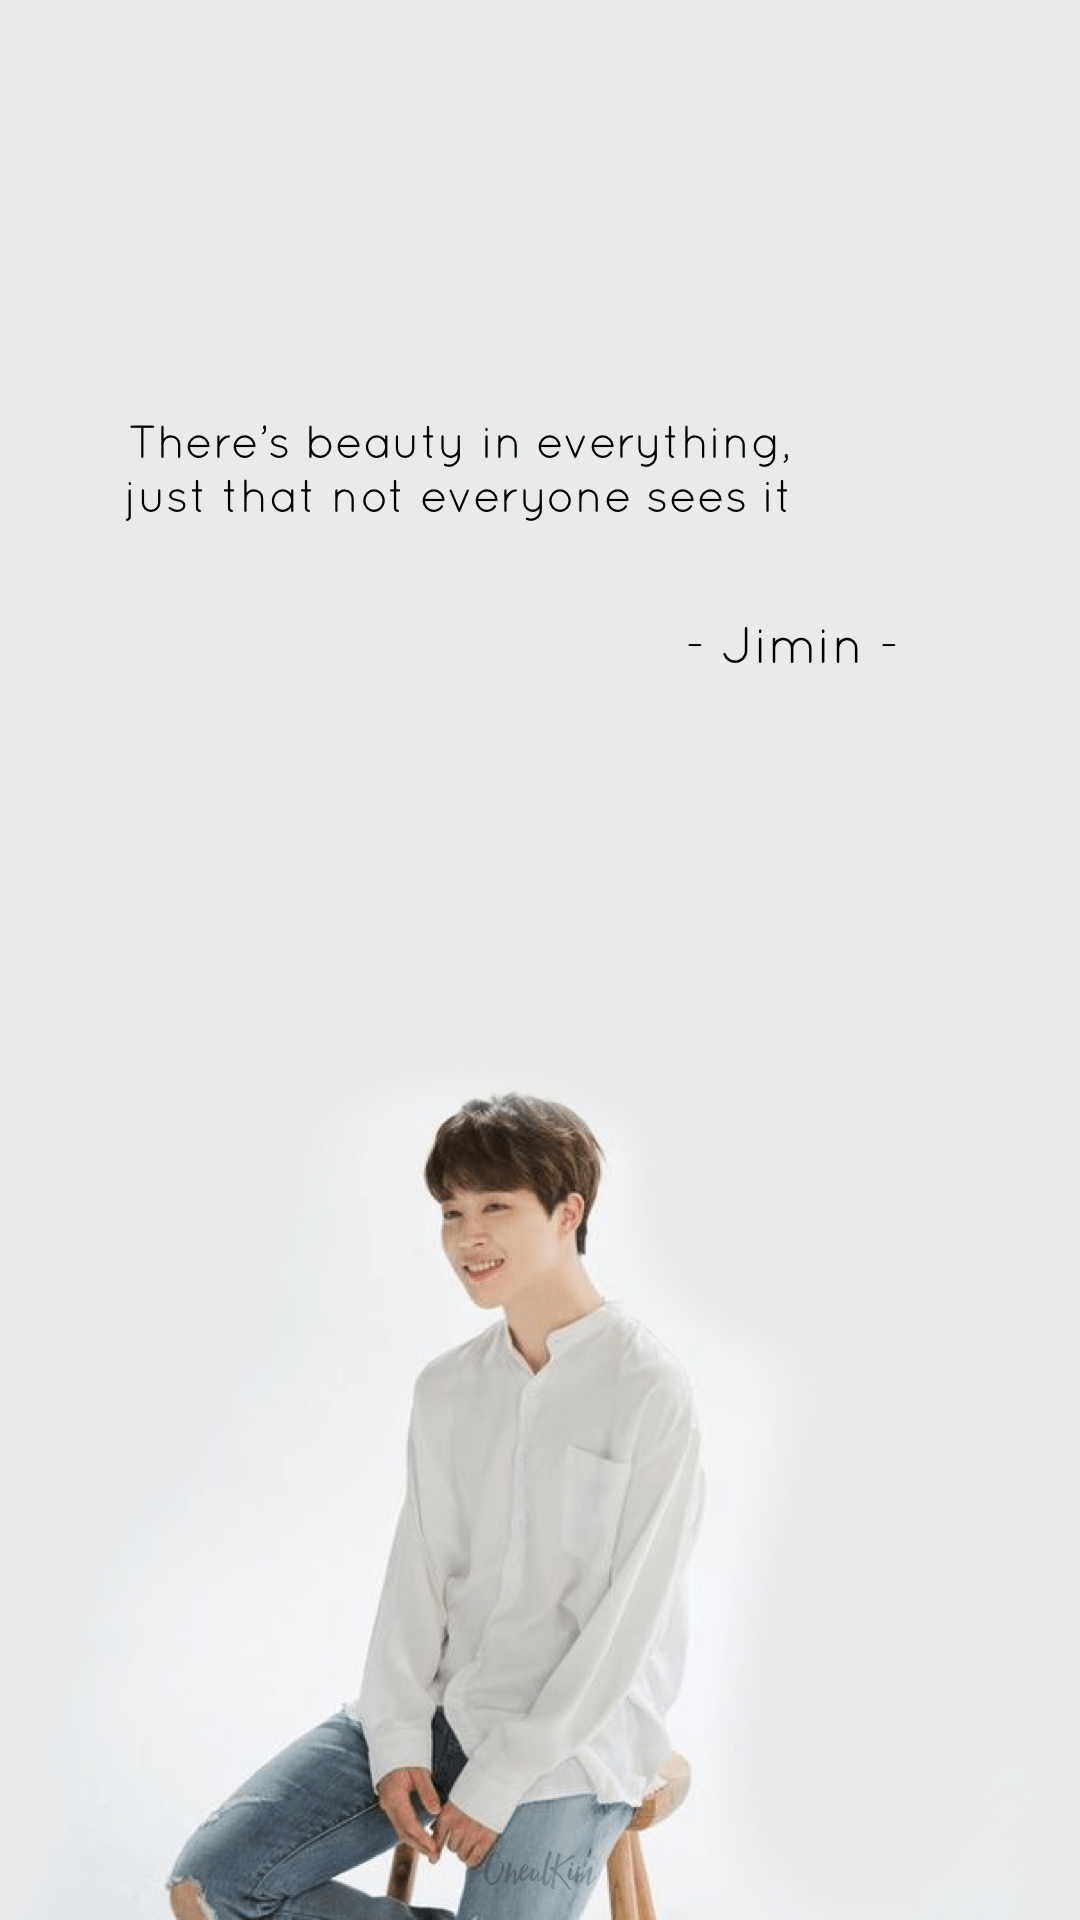 Jimin Quotes Wallpapers - Top Free Jimin Quotes Backgrounds ...